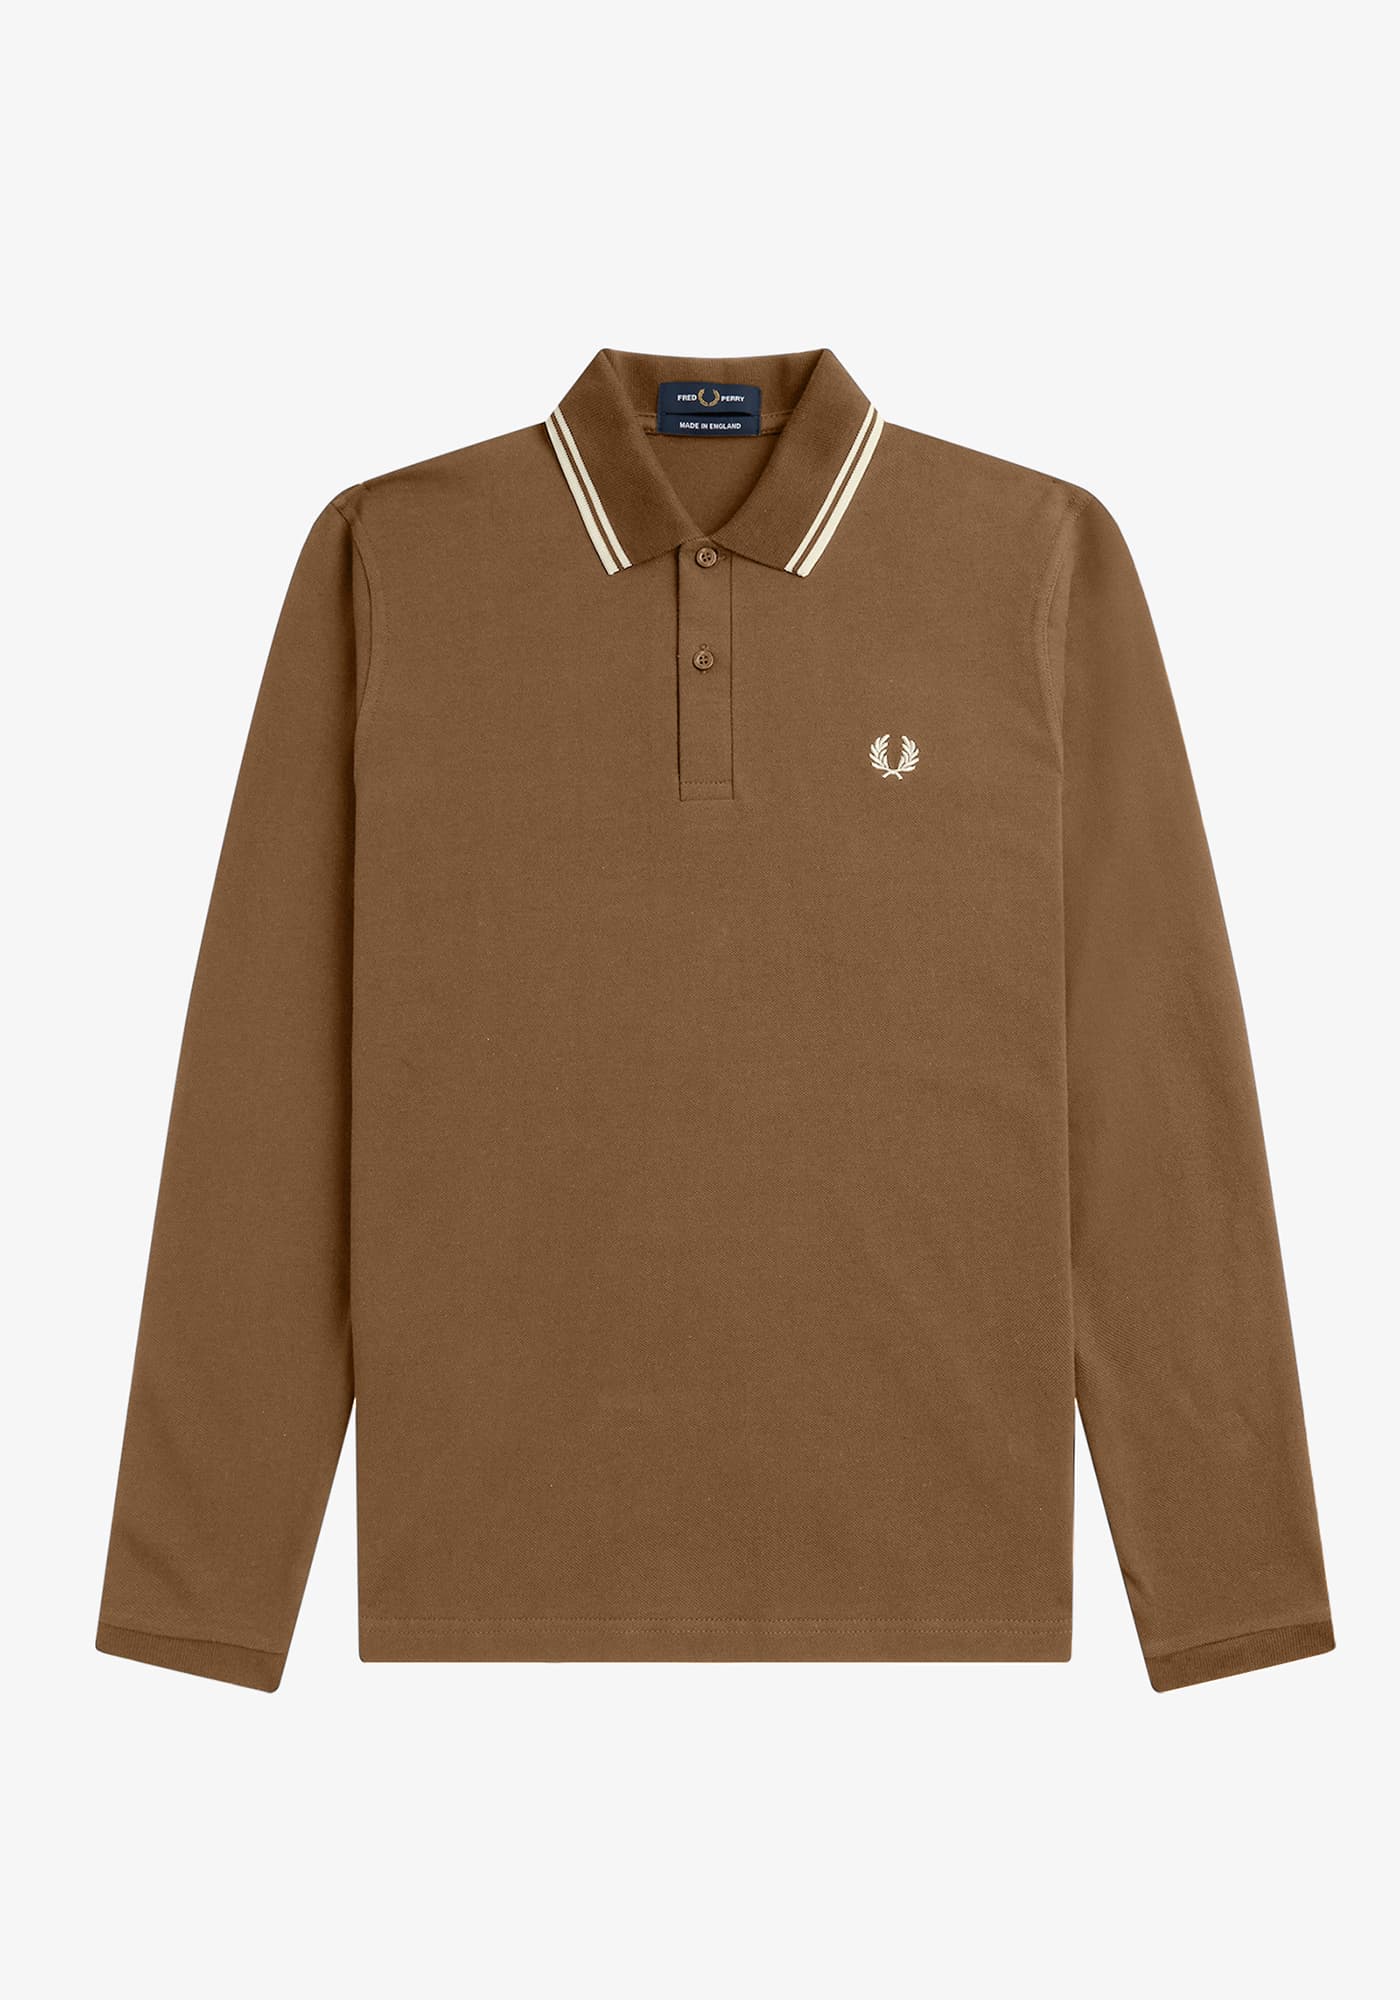 The Fred Perry Shirt - M1212